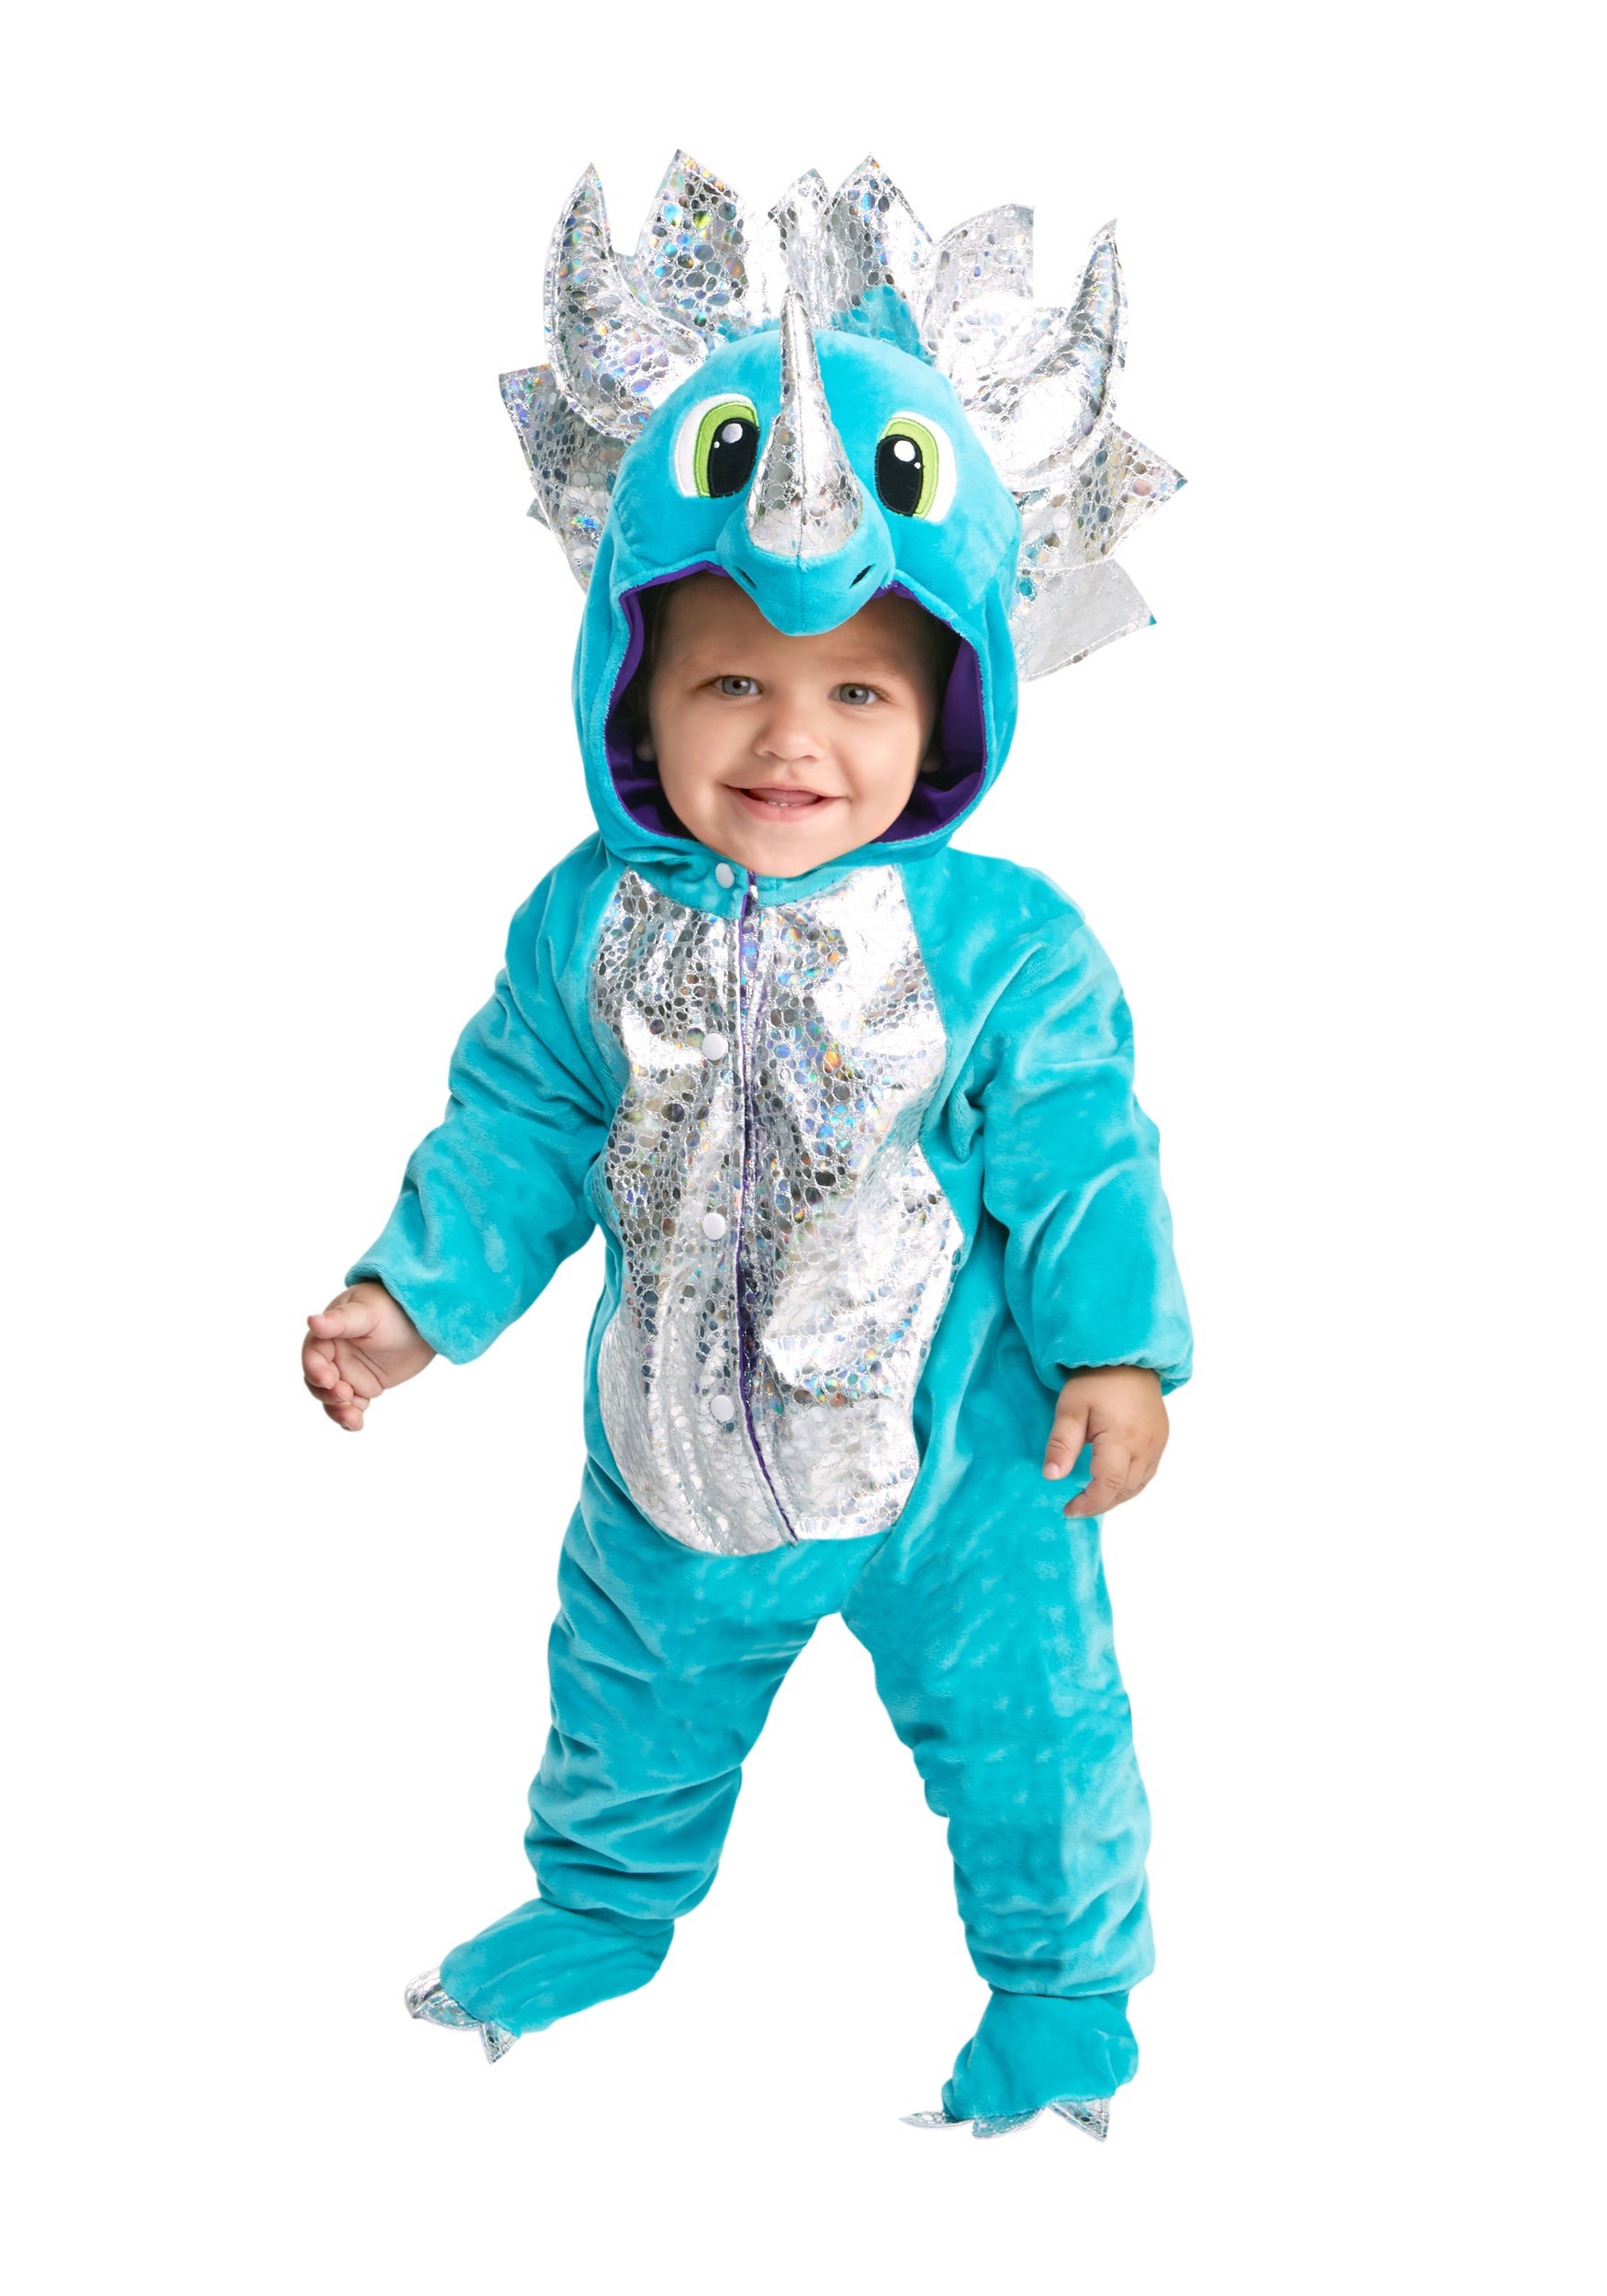 Darling Dinosaur Costume for Toddlers